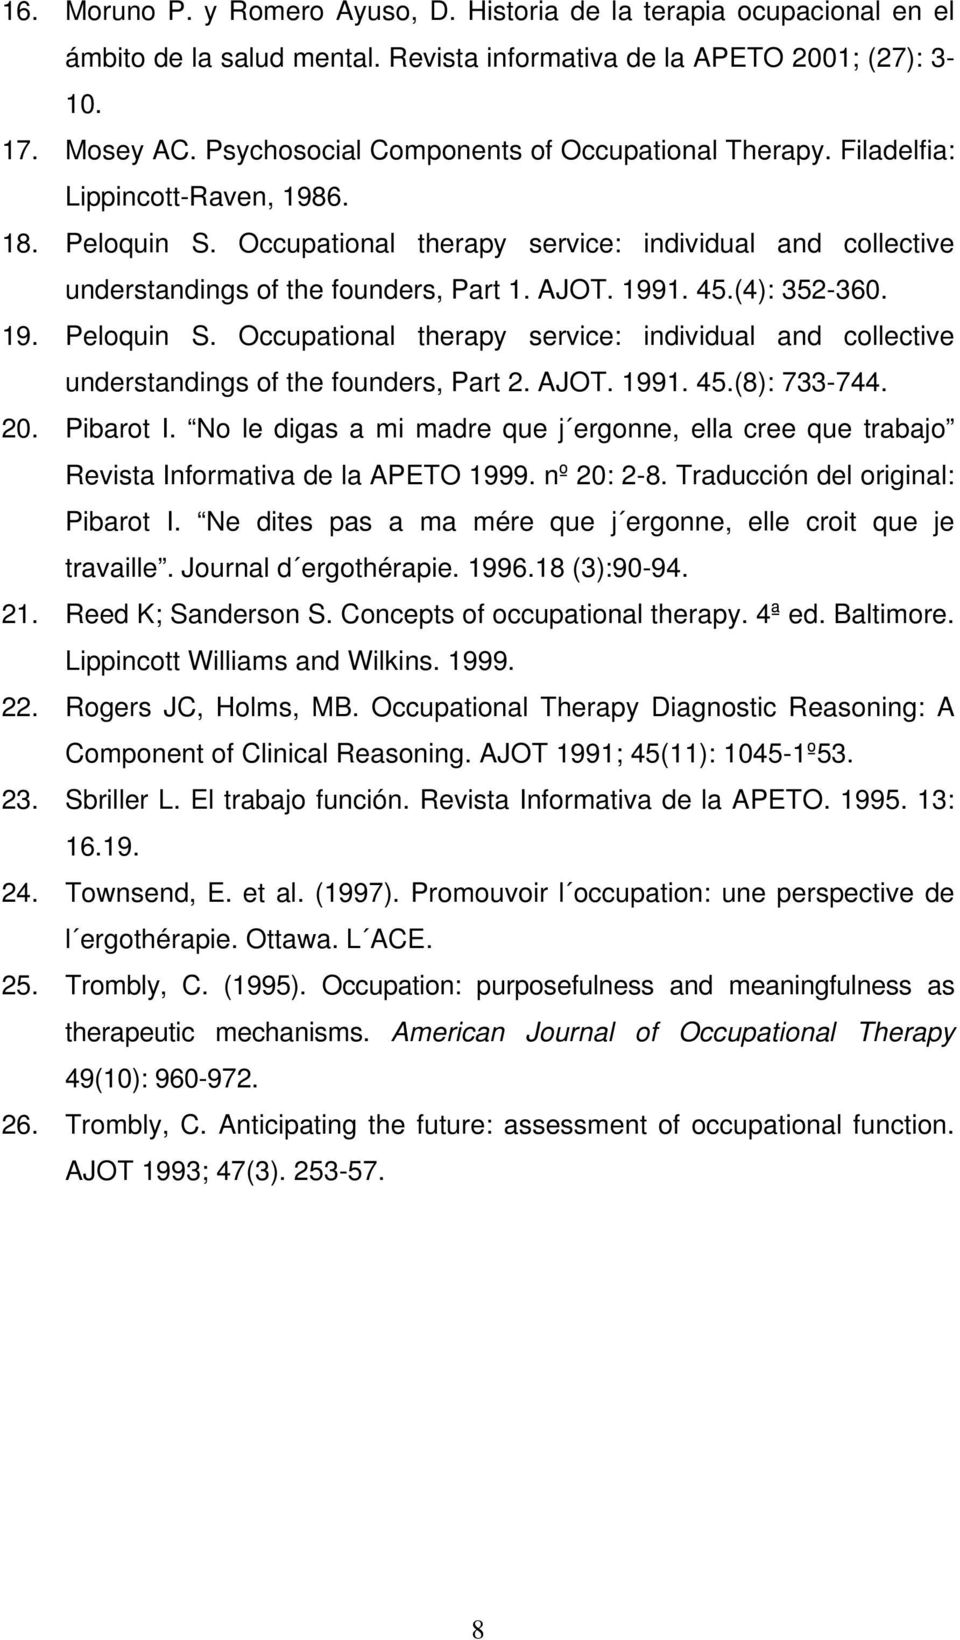 AJOT. 1991. 45.(4): 352-360. 19. Peloquin S. Occupational therapy service: individual and collective understandings of the founders, Part 2. AJOT. 1991. 45.(8): 733-744. 20. Pibarot I.